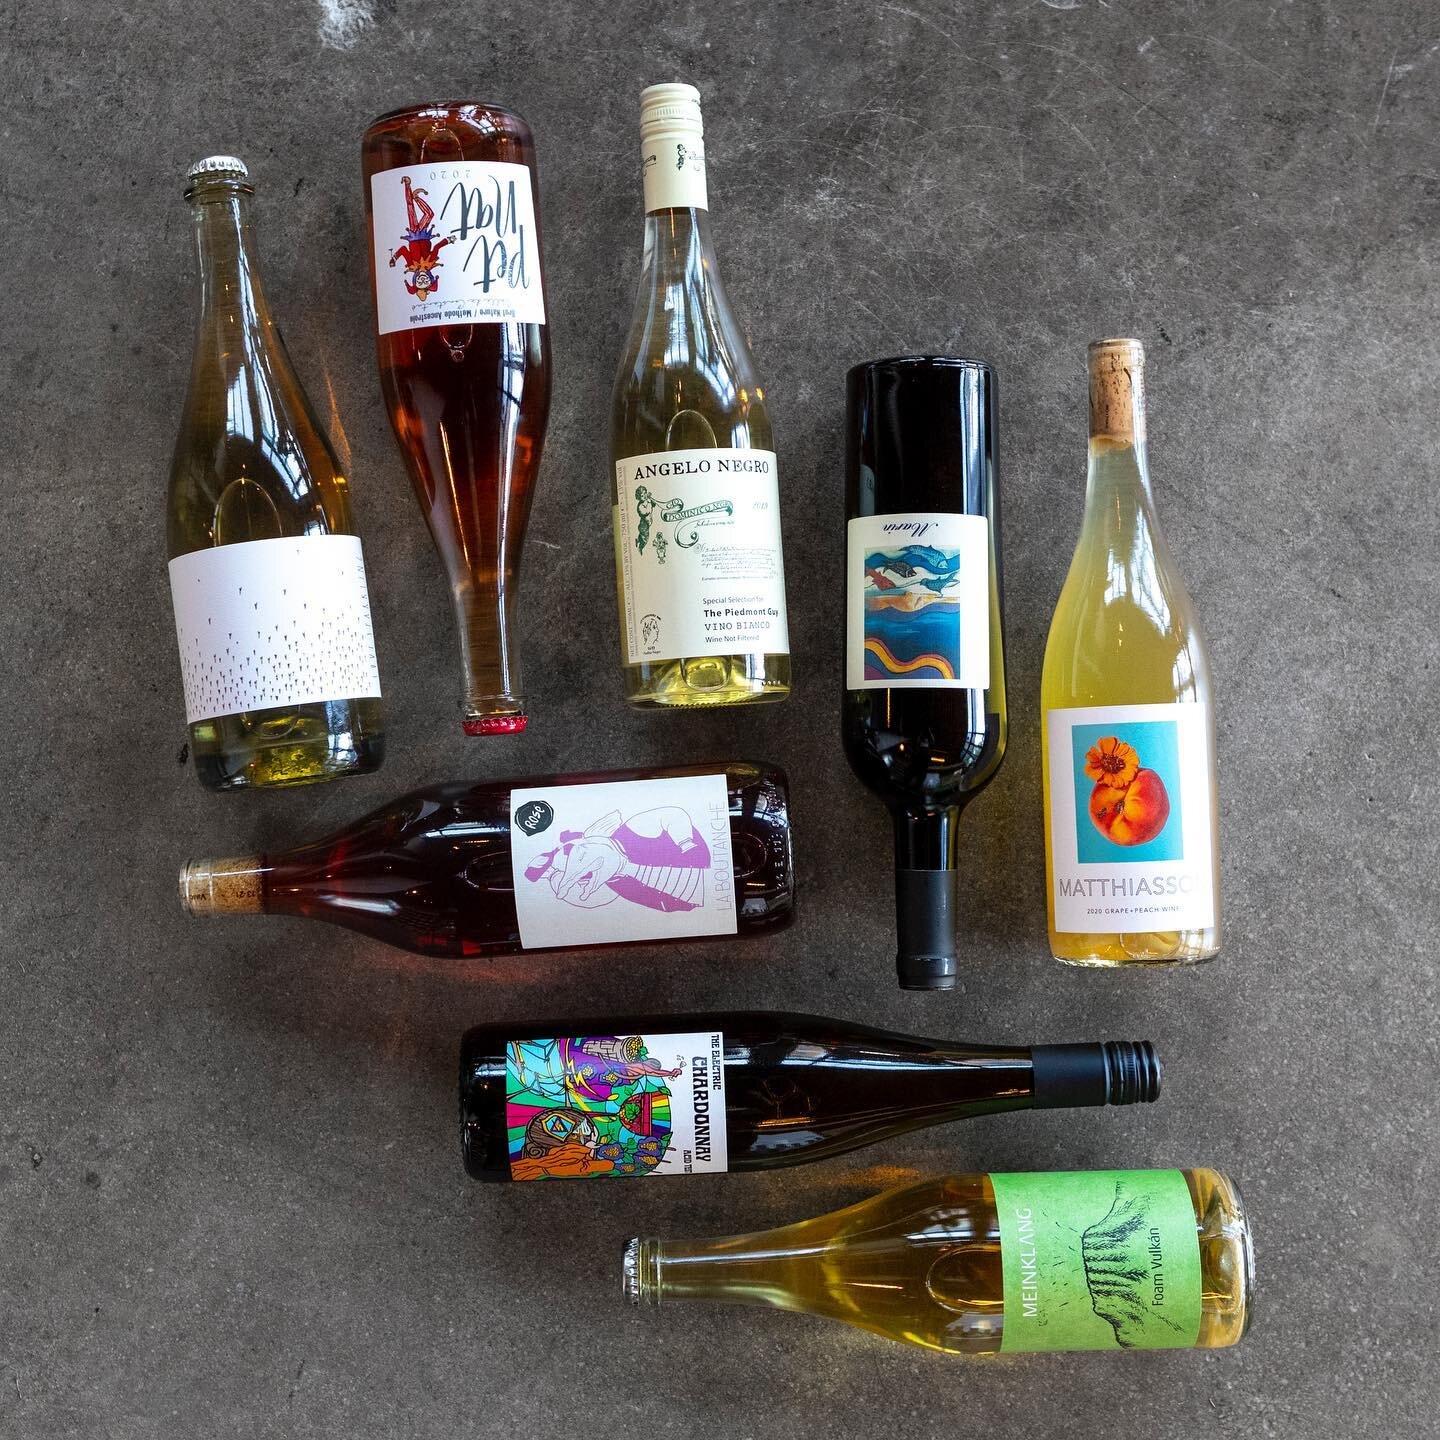 A few light and bright wines perfect to sip in the Sonoran summer heat! We&rsquo;re at the shop till 8pm to help you find the perfect bottles.